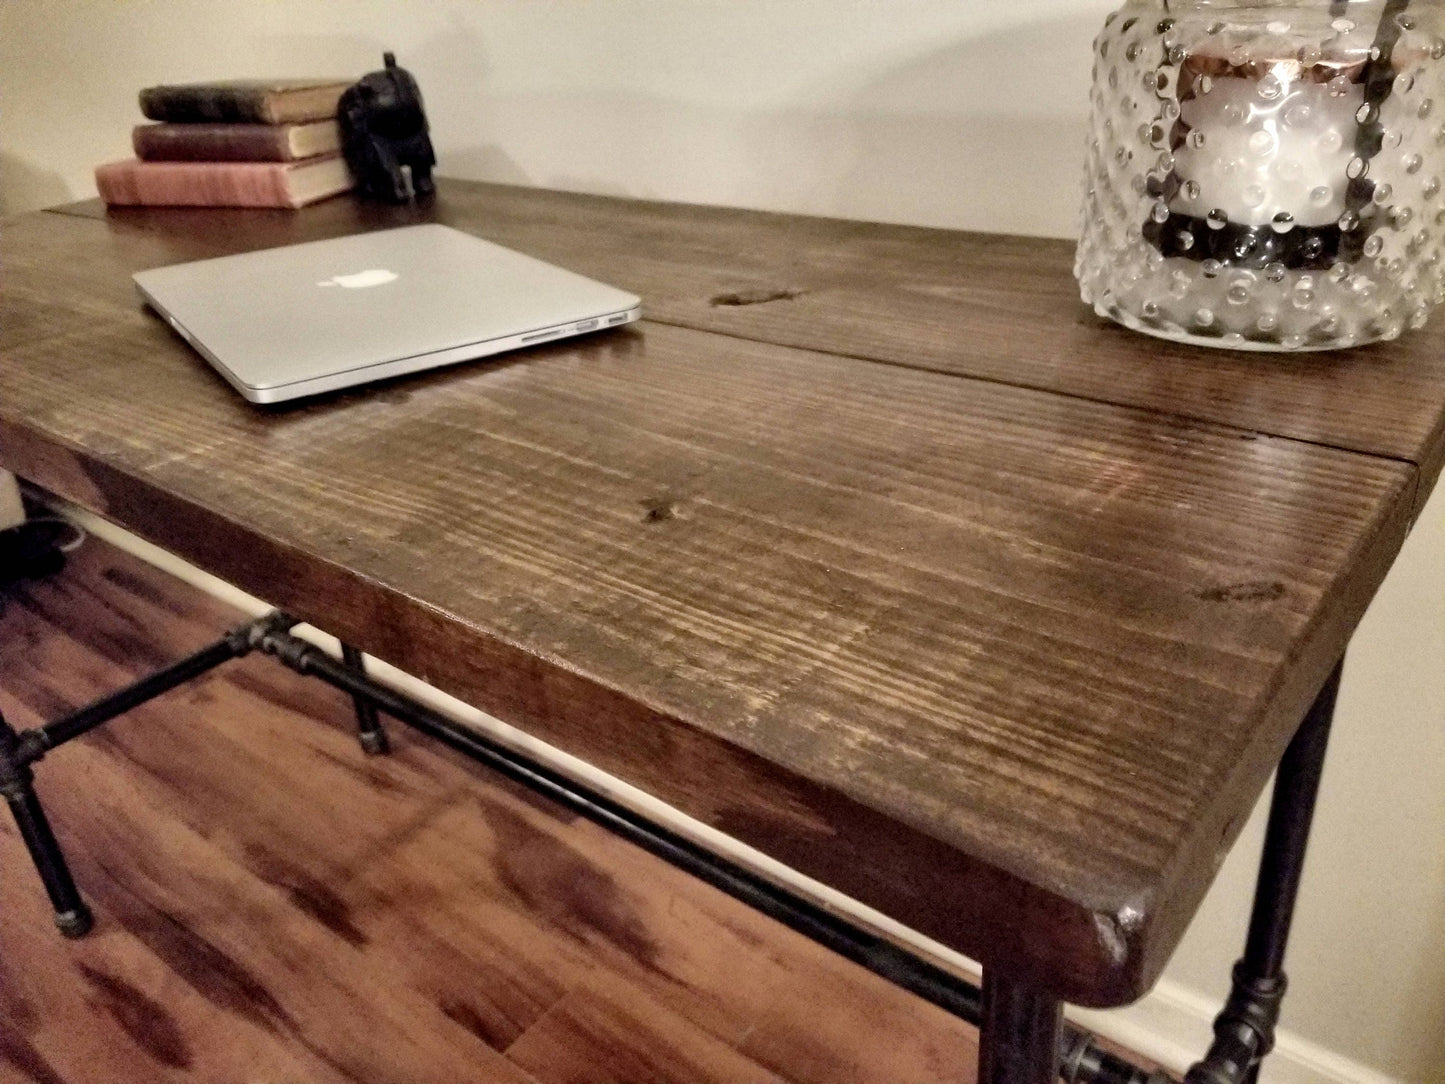 Steel and Wood Desk - Free Shipping